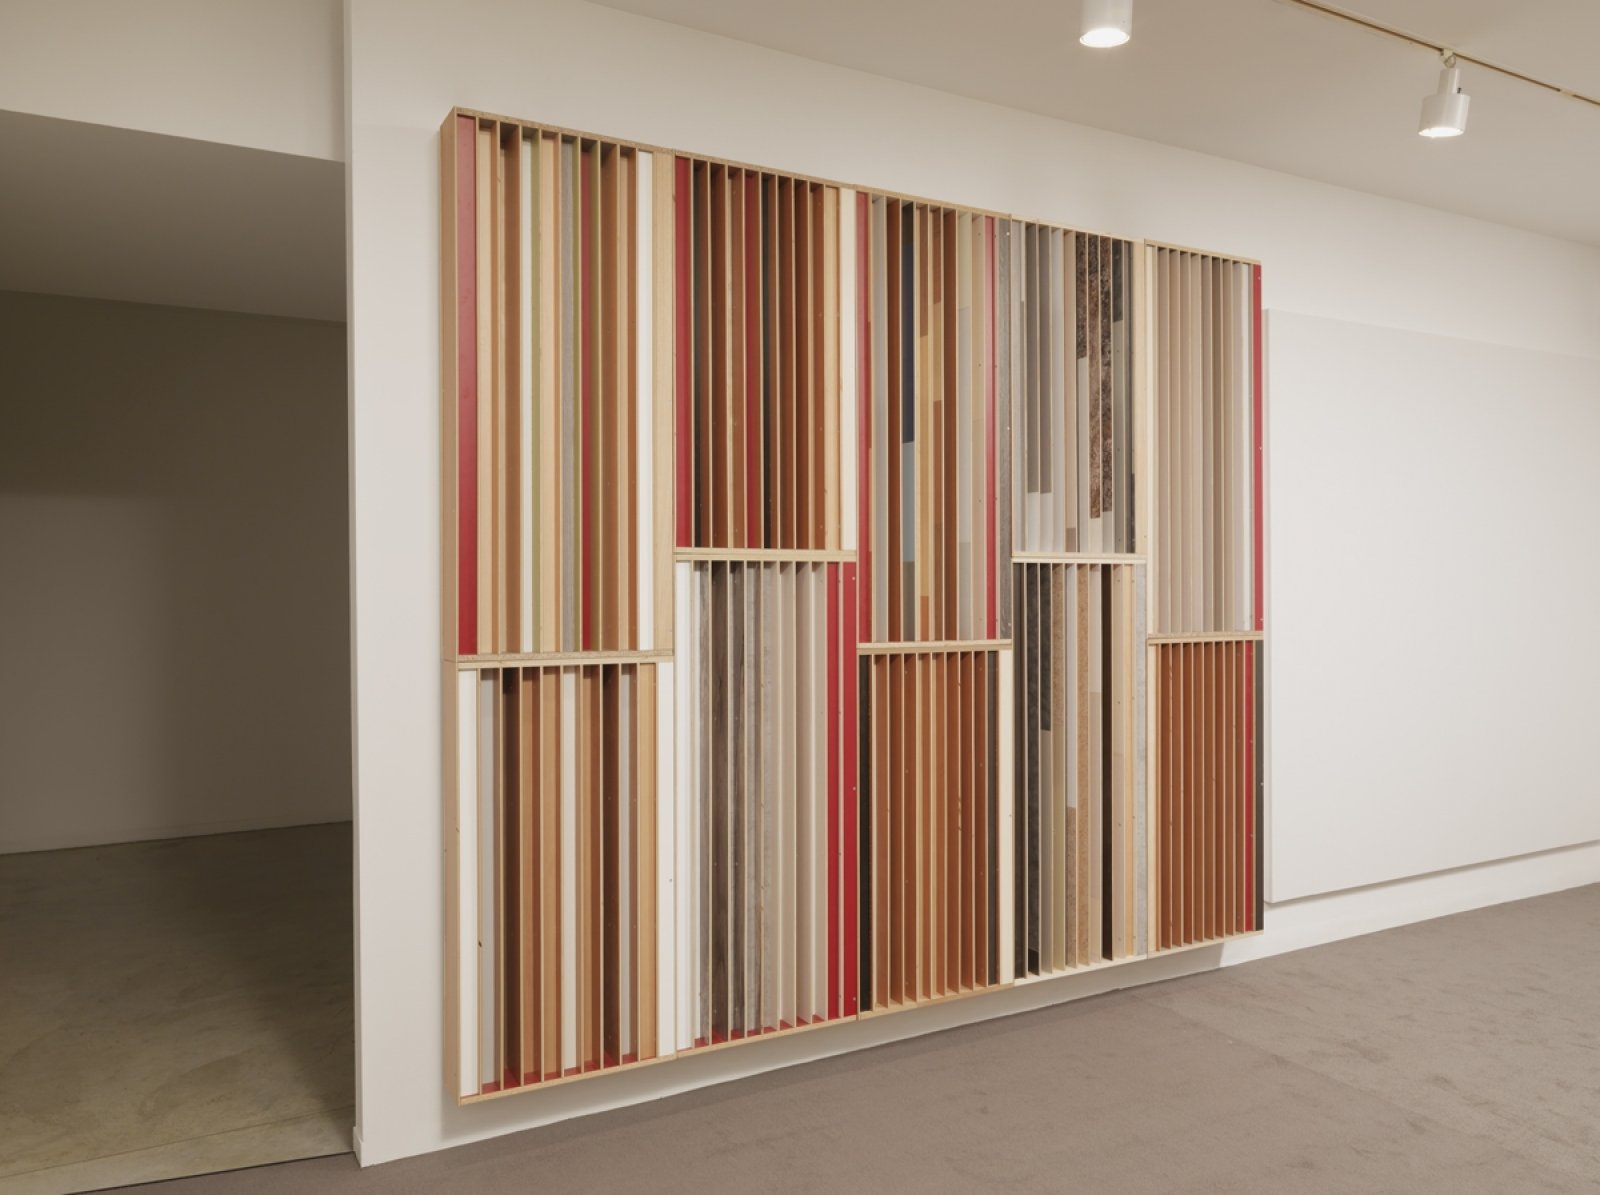 Kevin Schmidt, Excess Dispersion #1, 2018, kitchen cabinet and countertop offcuts, waste mdf laminate, 3 groups of 40 panels, dimensions variable. Installation view, We Are the Robots, Vancouver Art Gallery, Vancouver, 2018